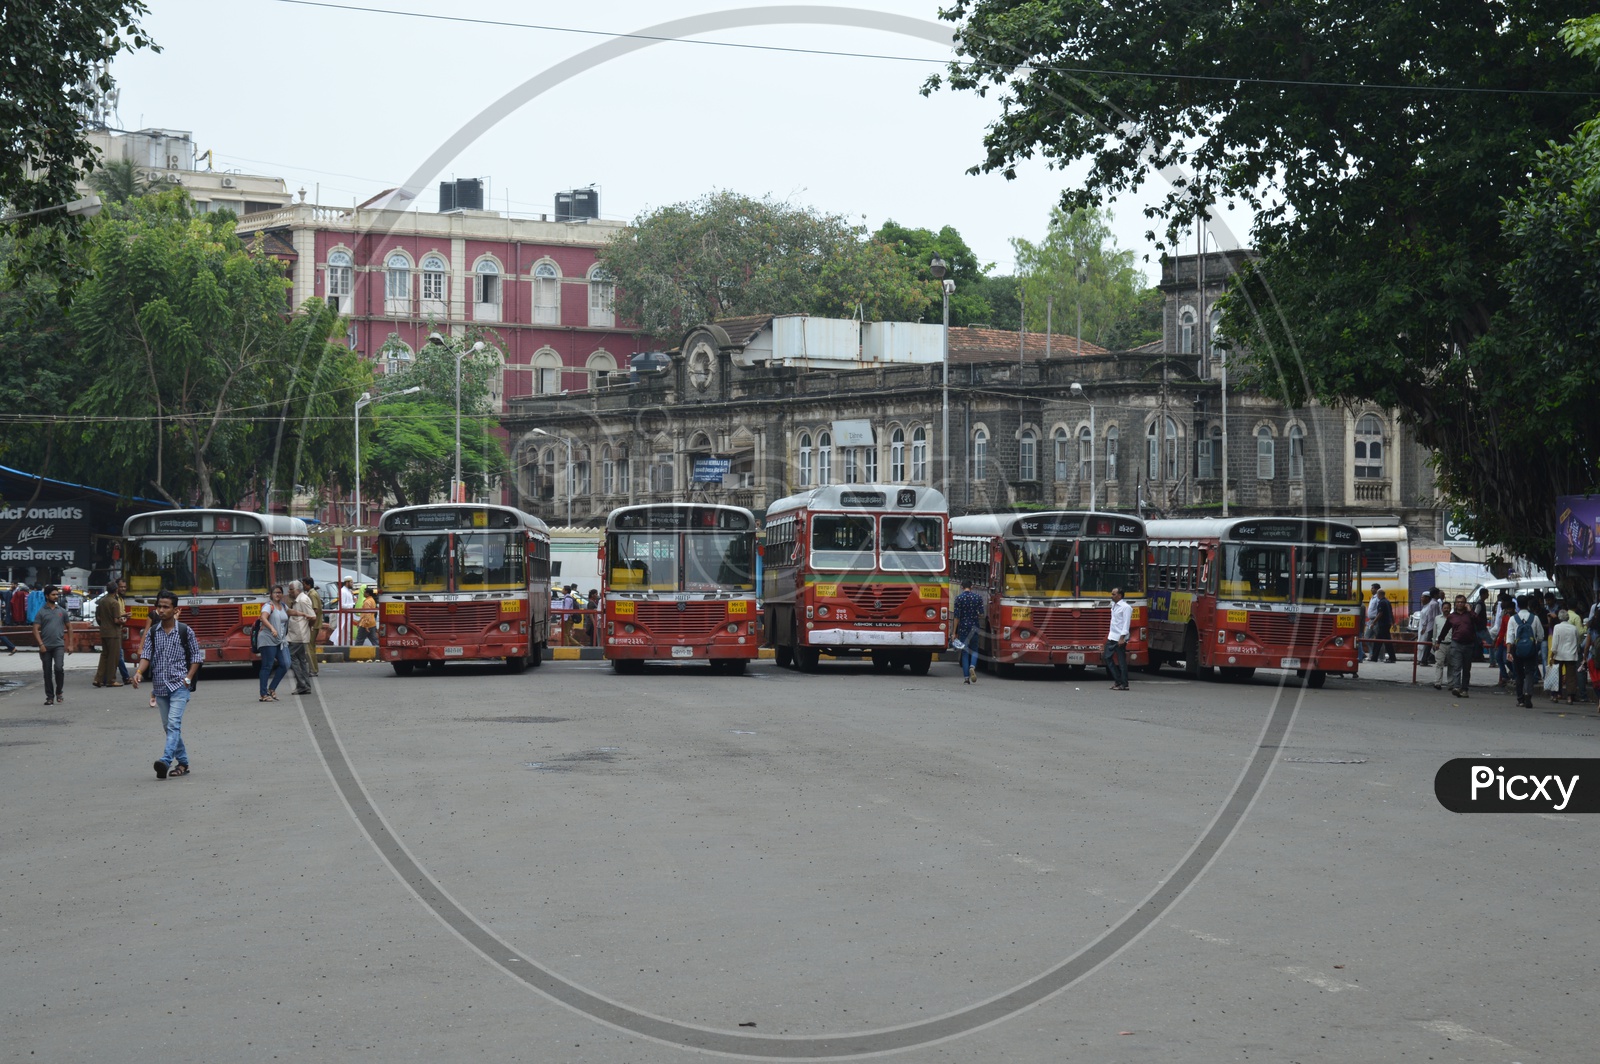 Buses in the bus stand